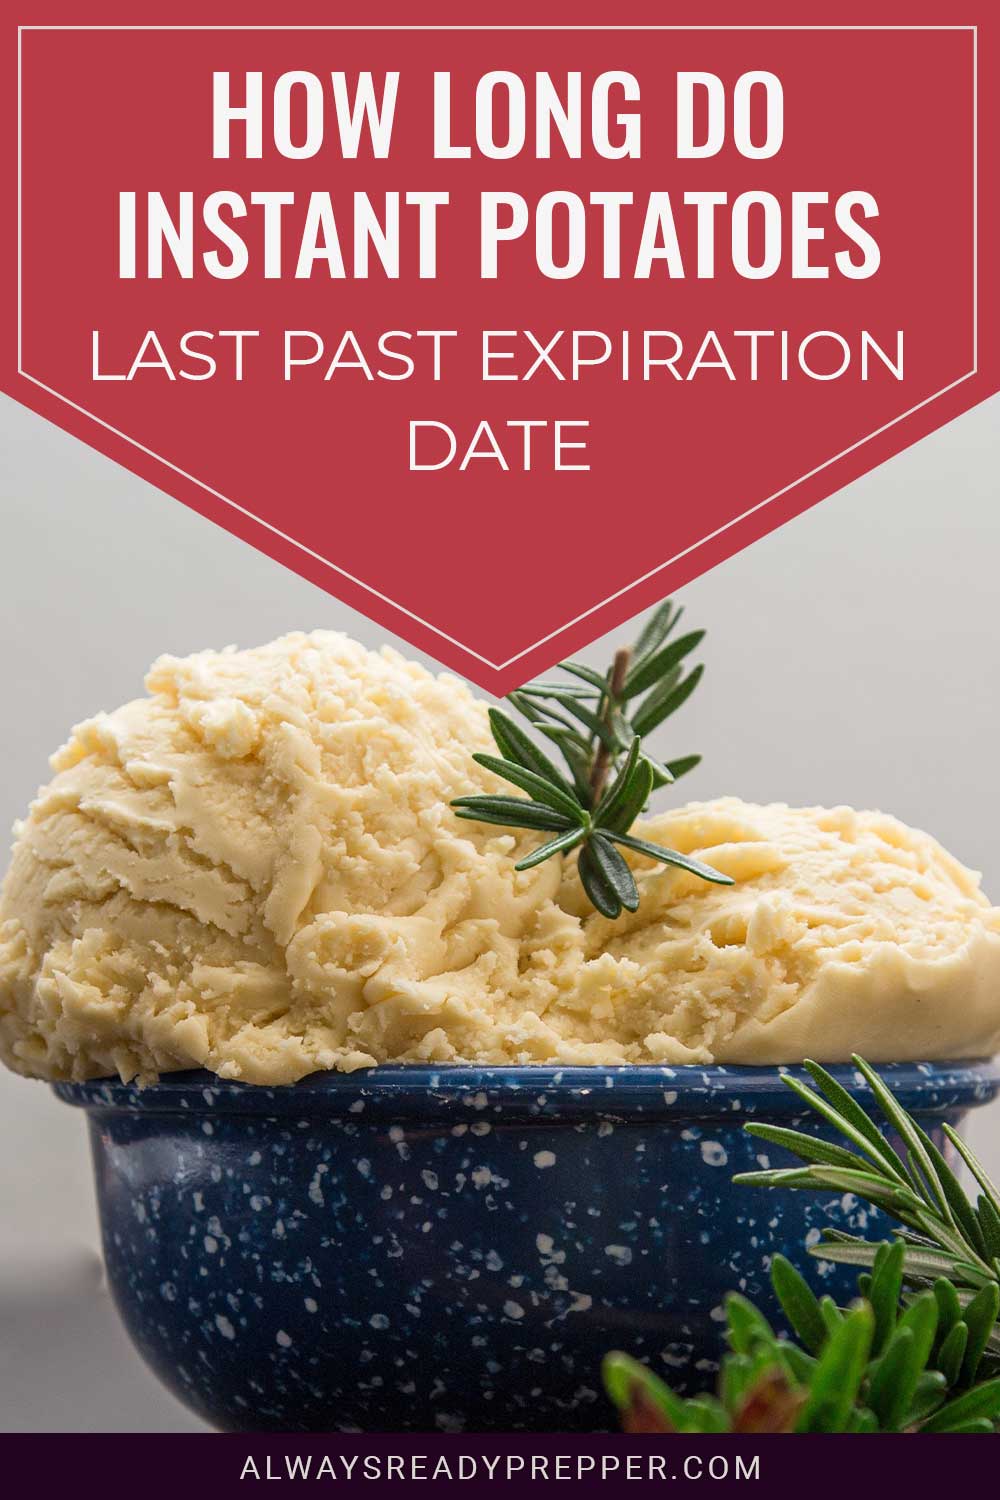 Instant potatoes in a blue bowl - How Long Do Instant Potatoes Last Past Expiration Date?